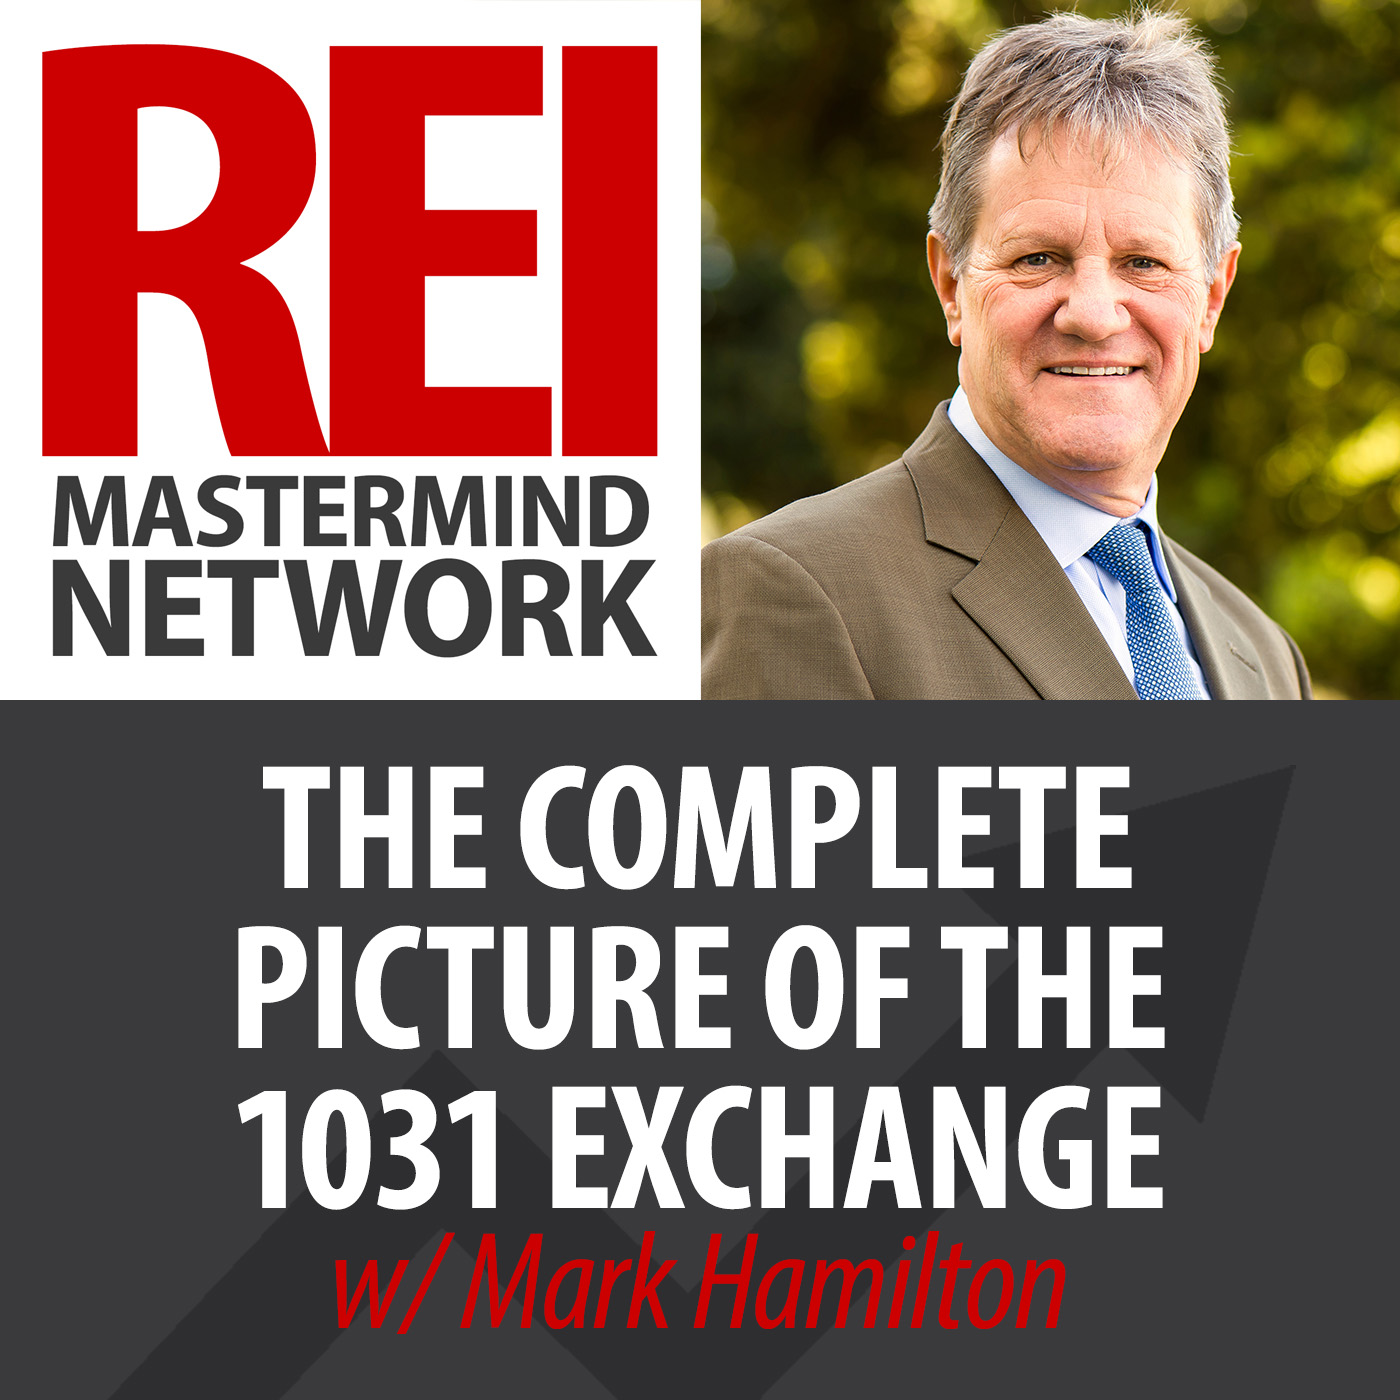 The Complete Picture of the 1031 Exchange with Mark Hamilton Image